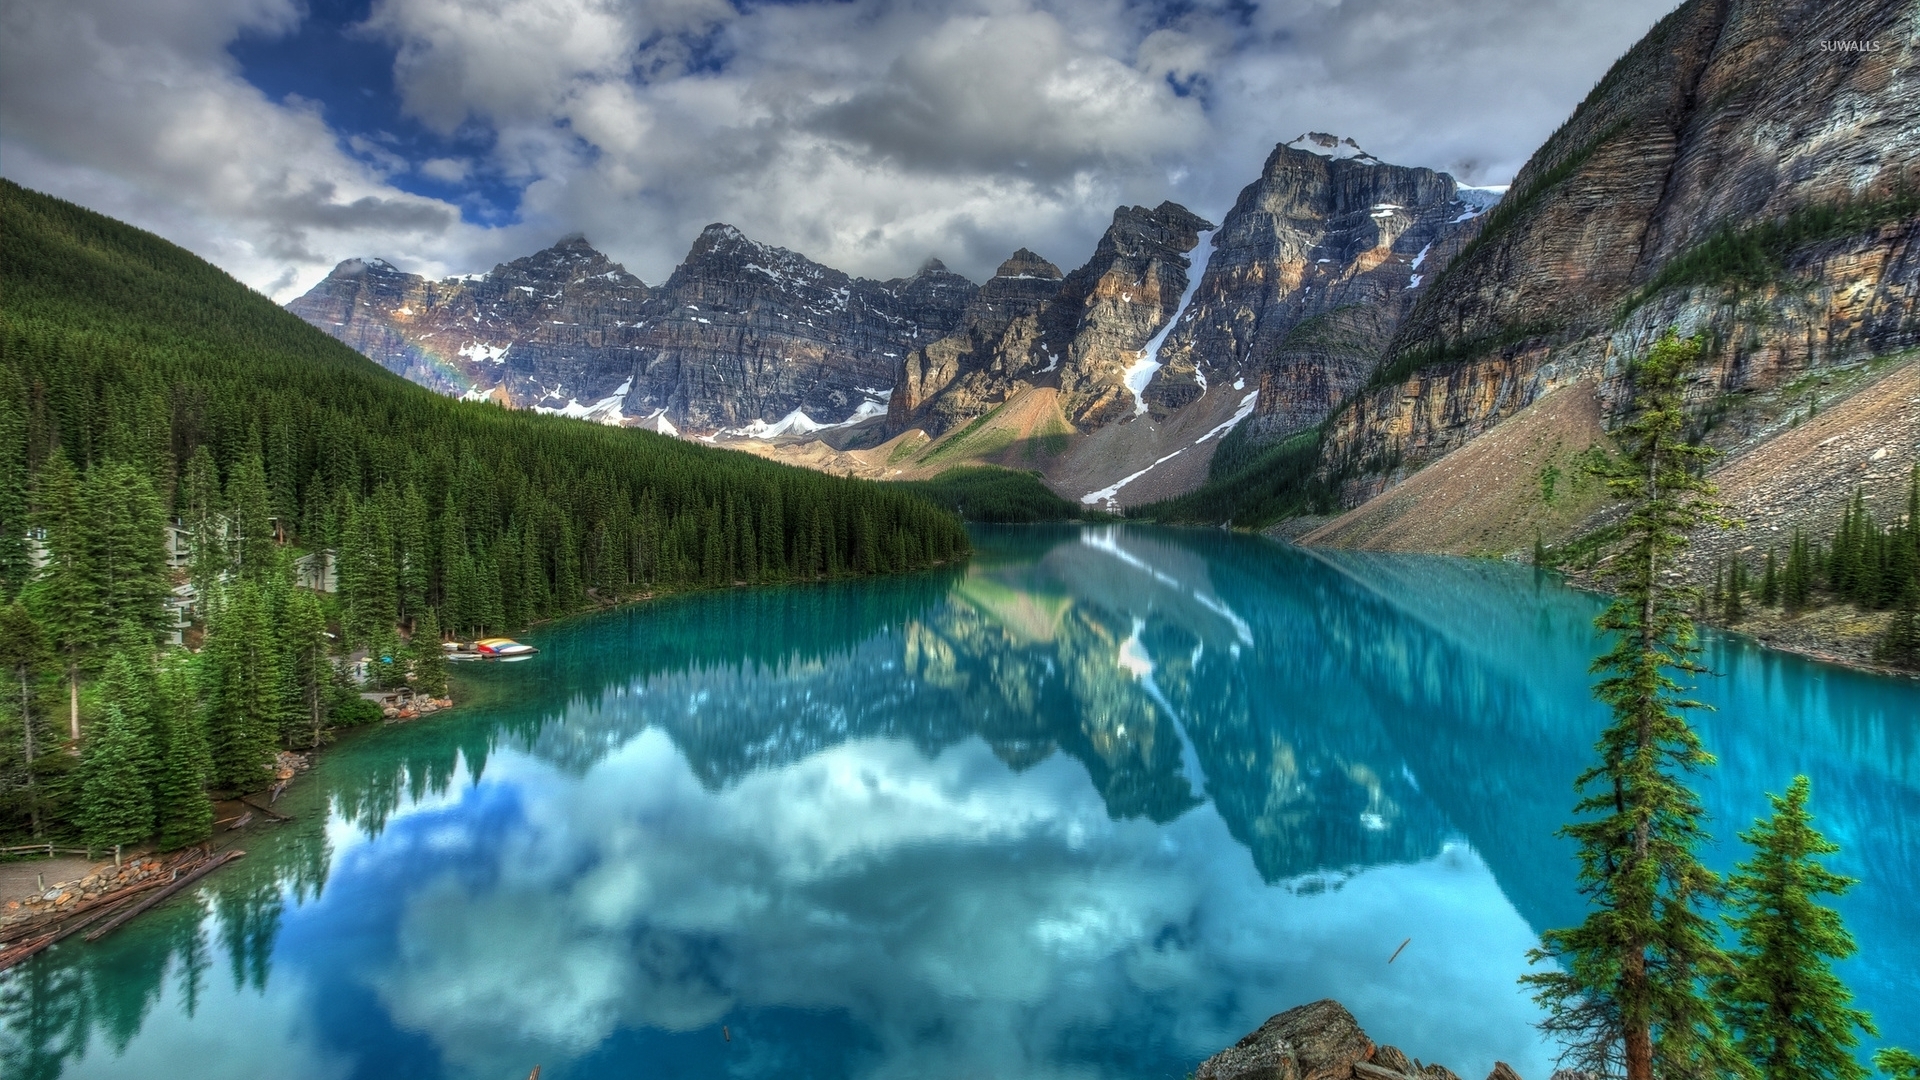 Turquoise lake in Banff National Park wallpaper - Nature wallpapers ...